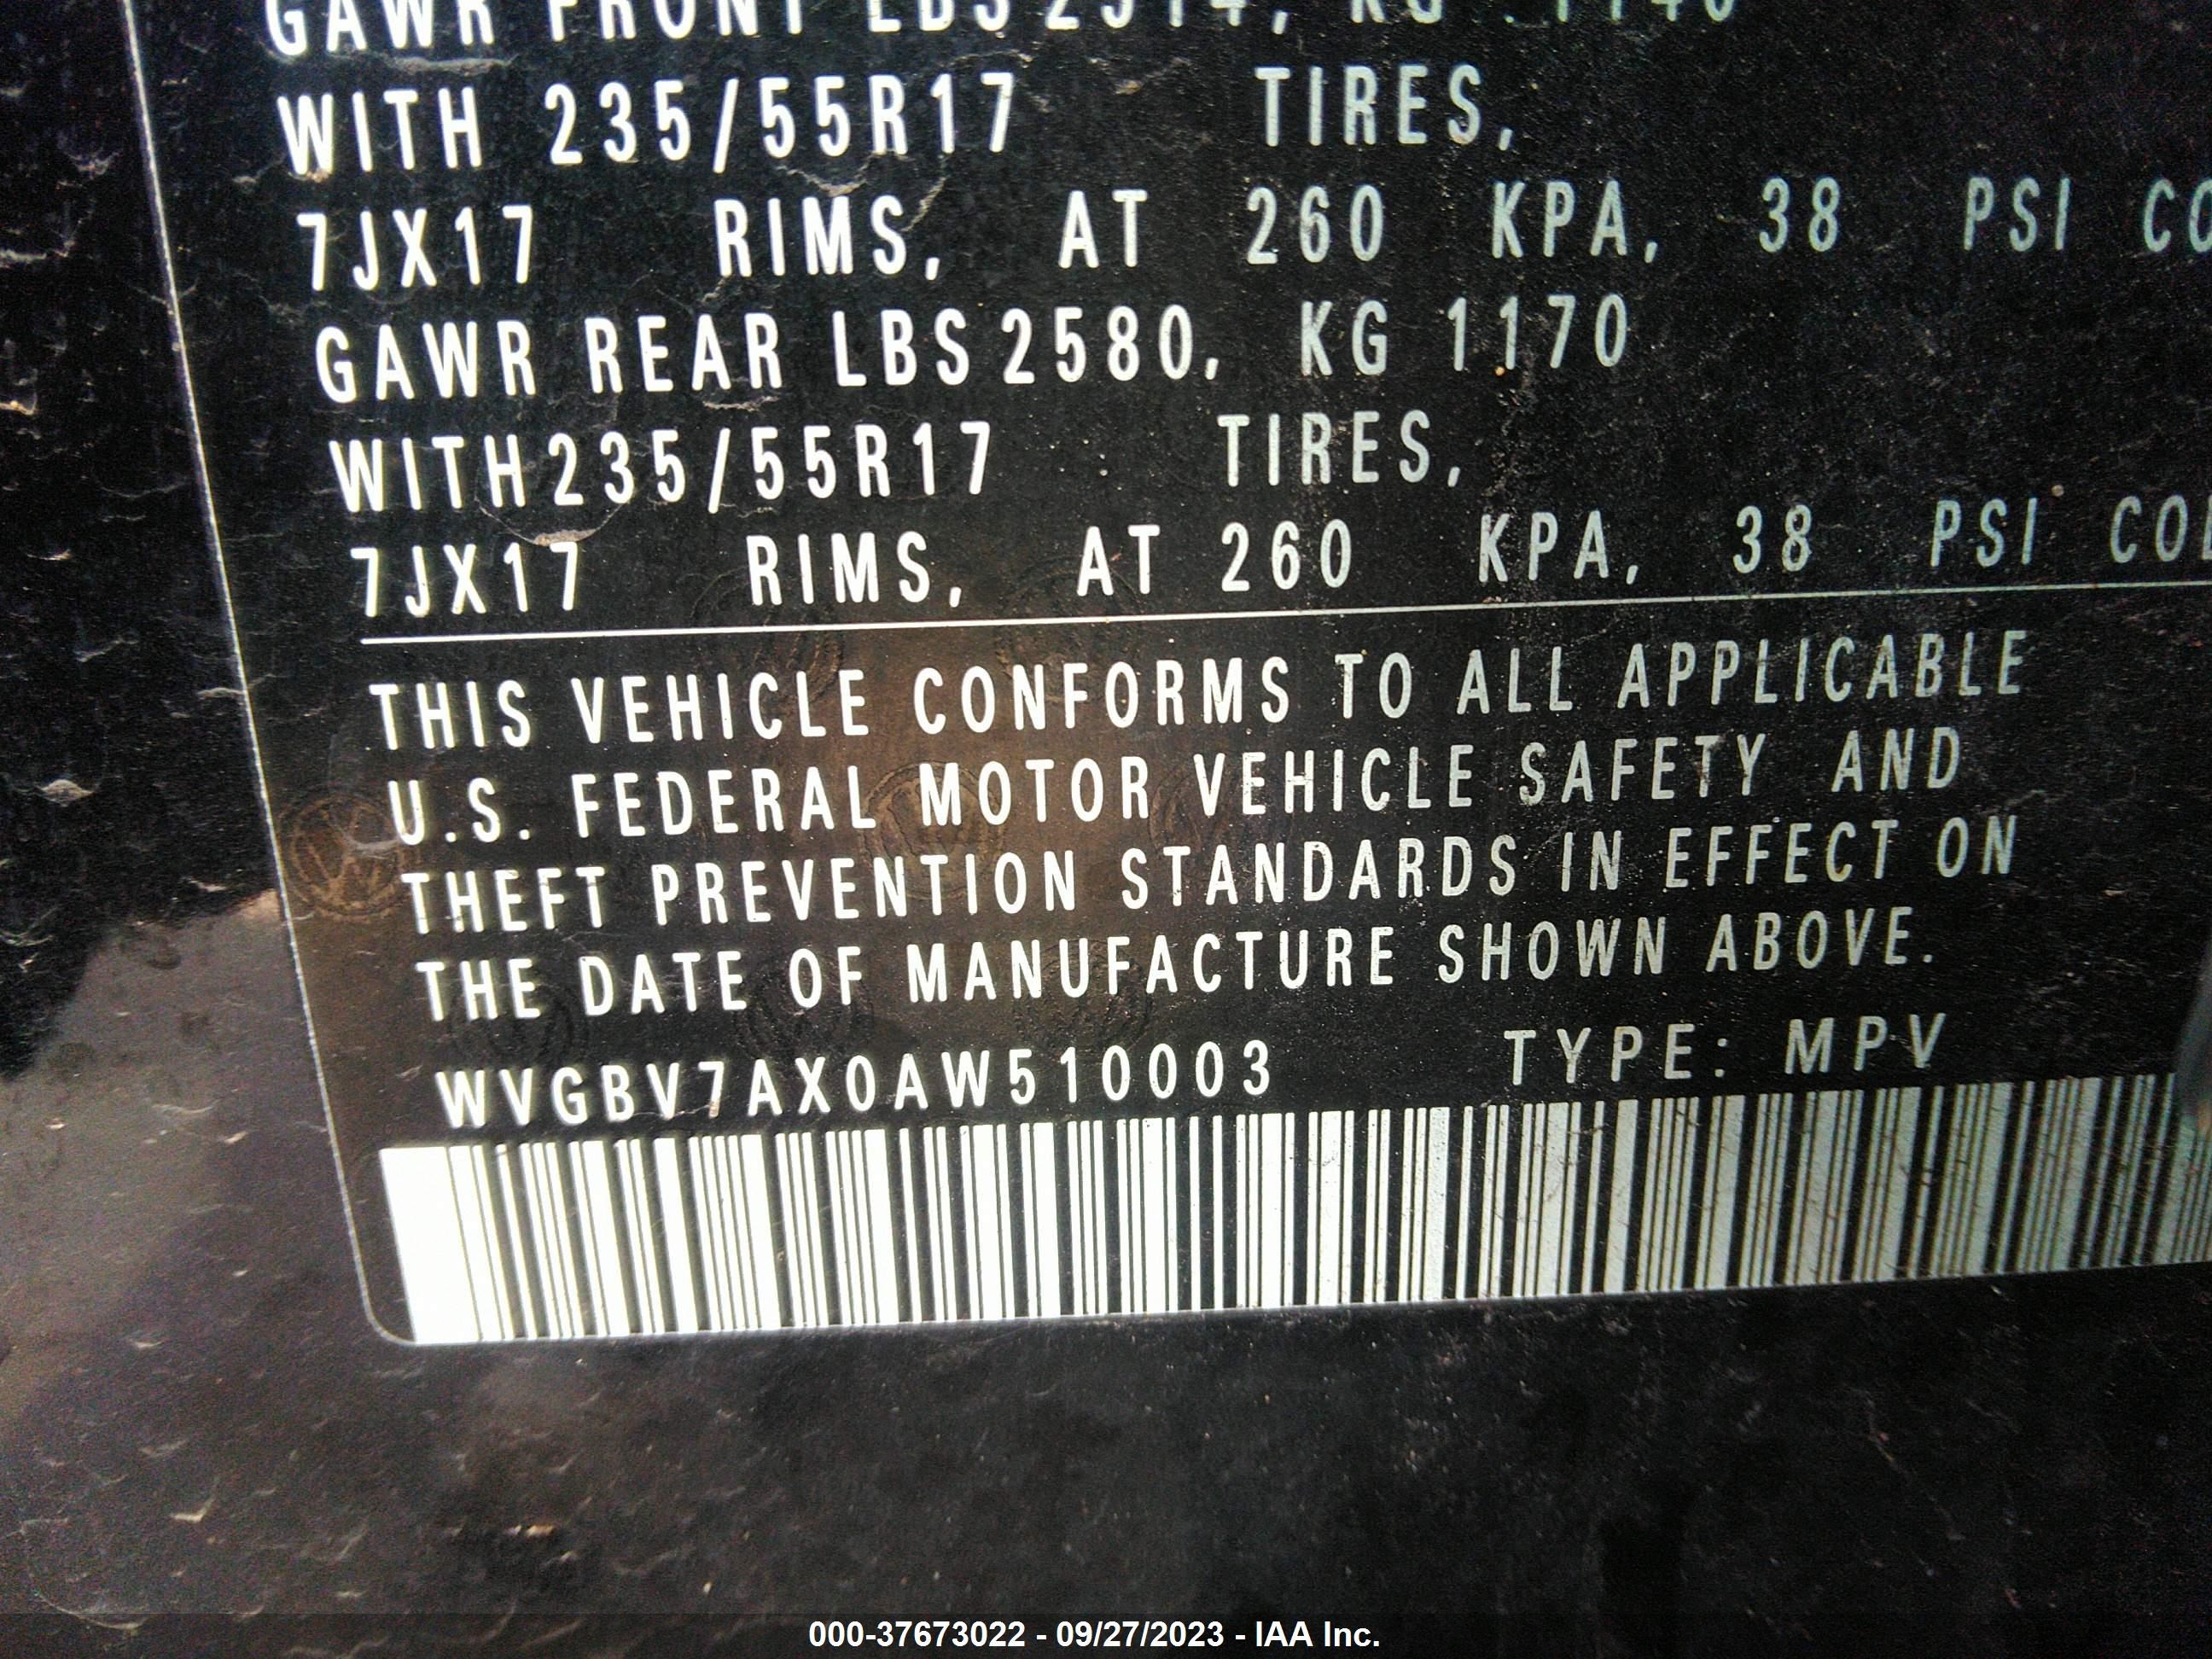 WVGBV7AX0AW510003  - VOLKSWAGEN TIGUAN  2010 IMG - 8